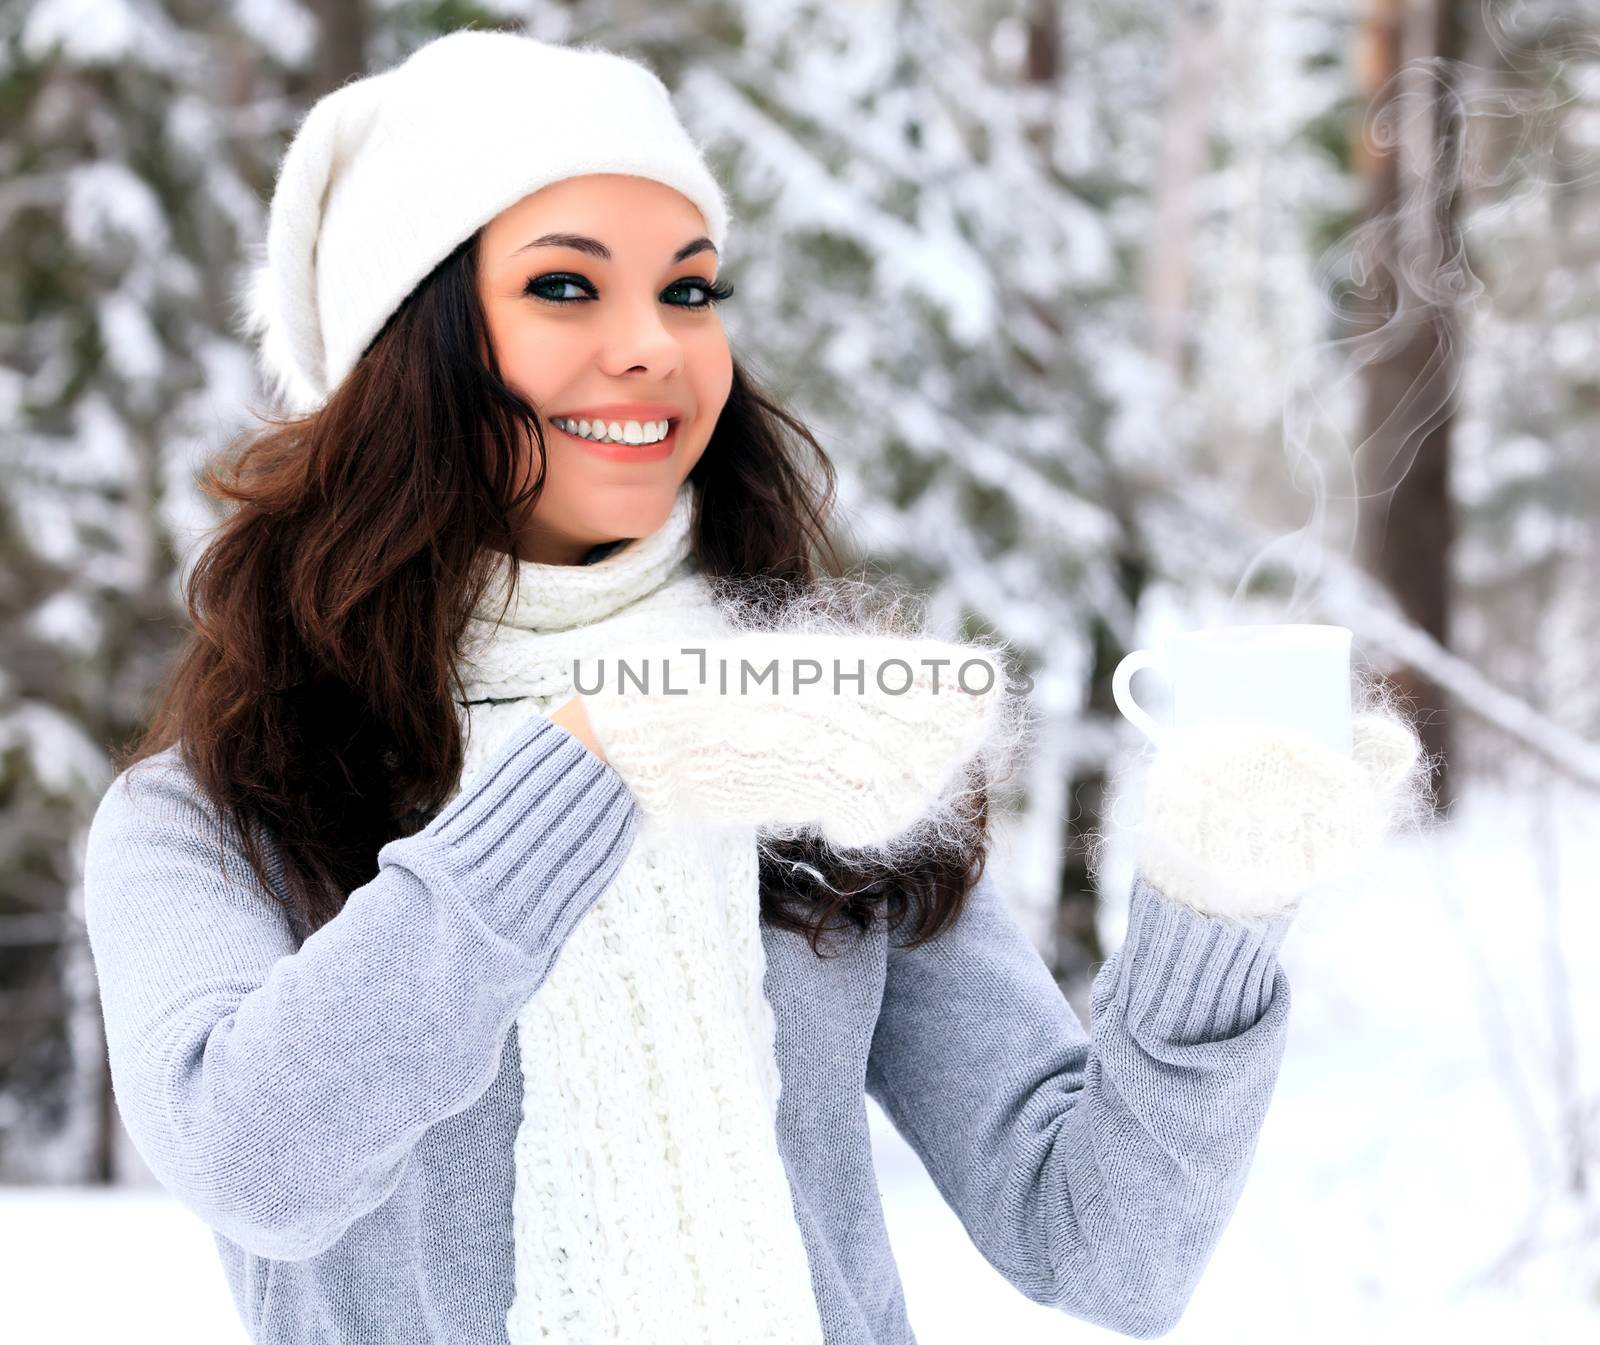 Woman with a cup of hot tea or coffee posing outdoors